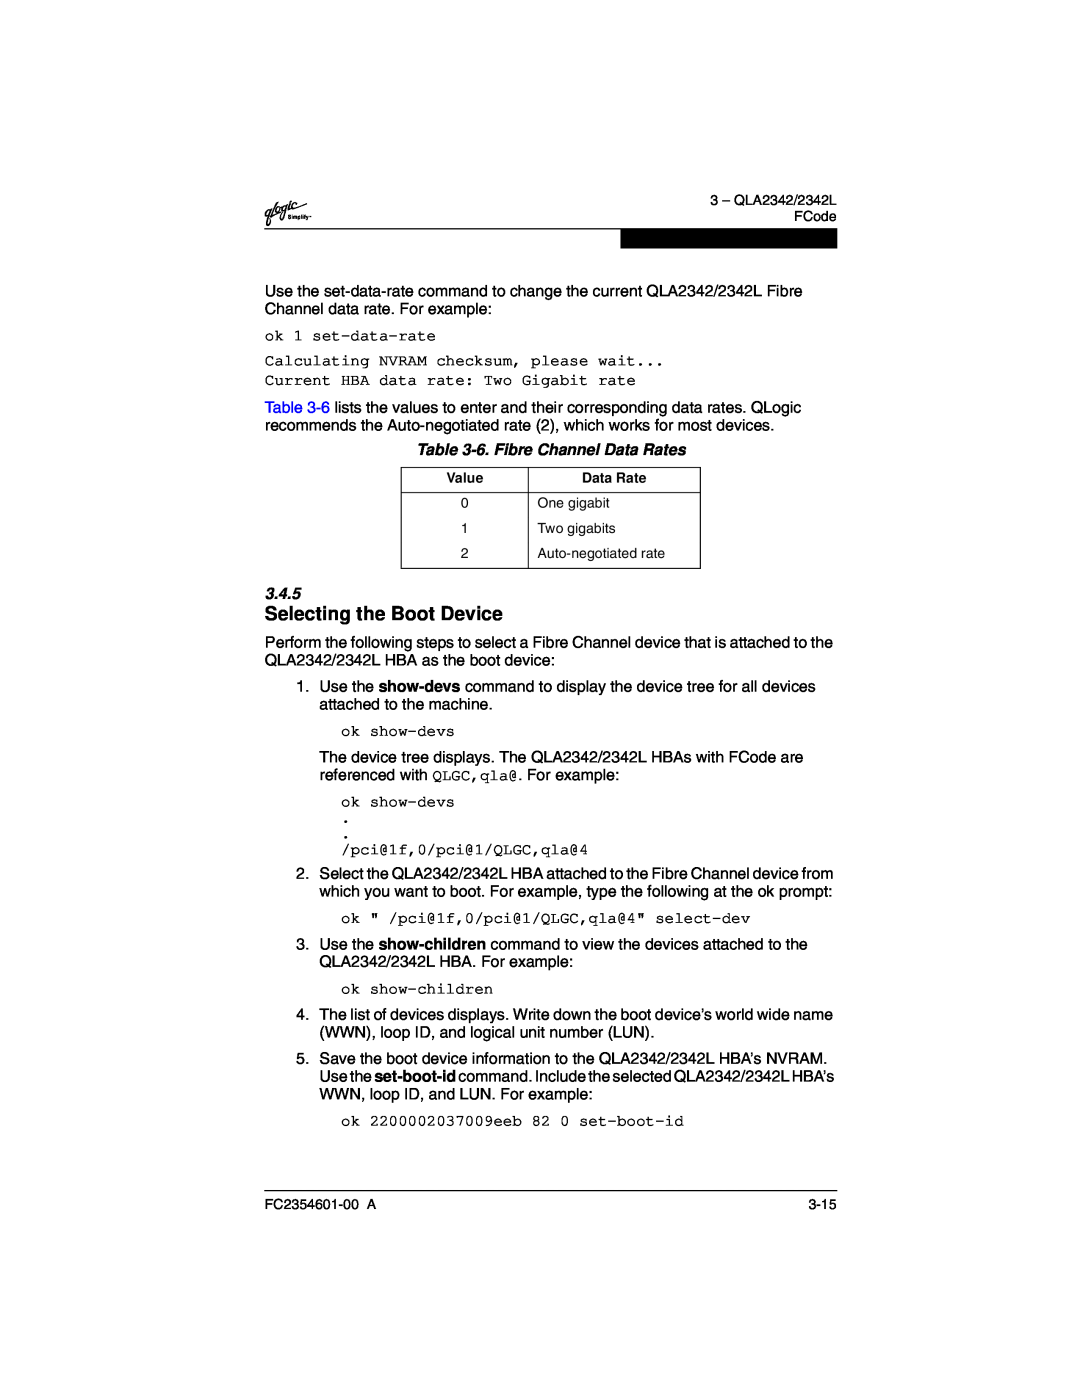 Q-Logic 2300 manual 6. Fibre Channel Data Rates, 3.4.5, Selecting the Boot Device 